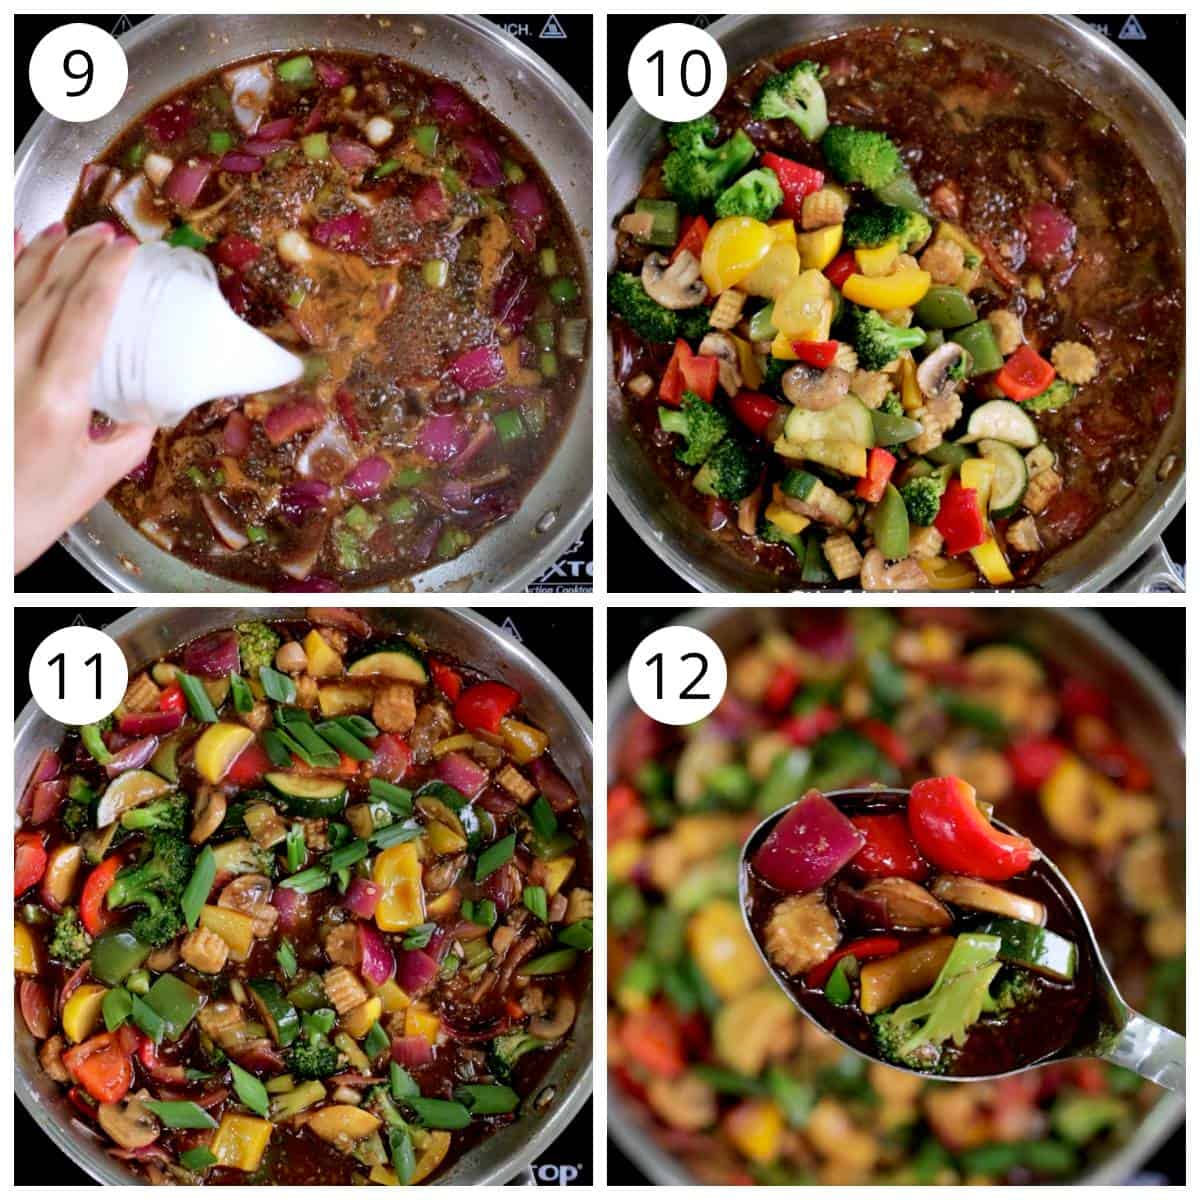 Steps for combining stir fried veggies with hot garlic sauce